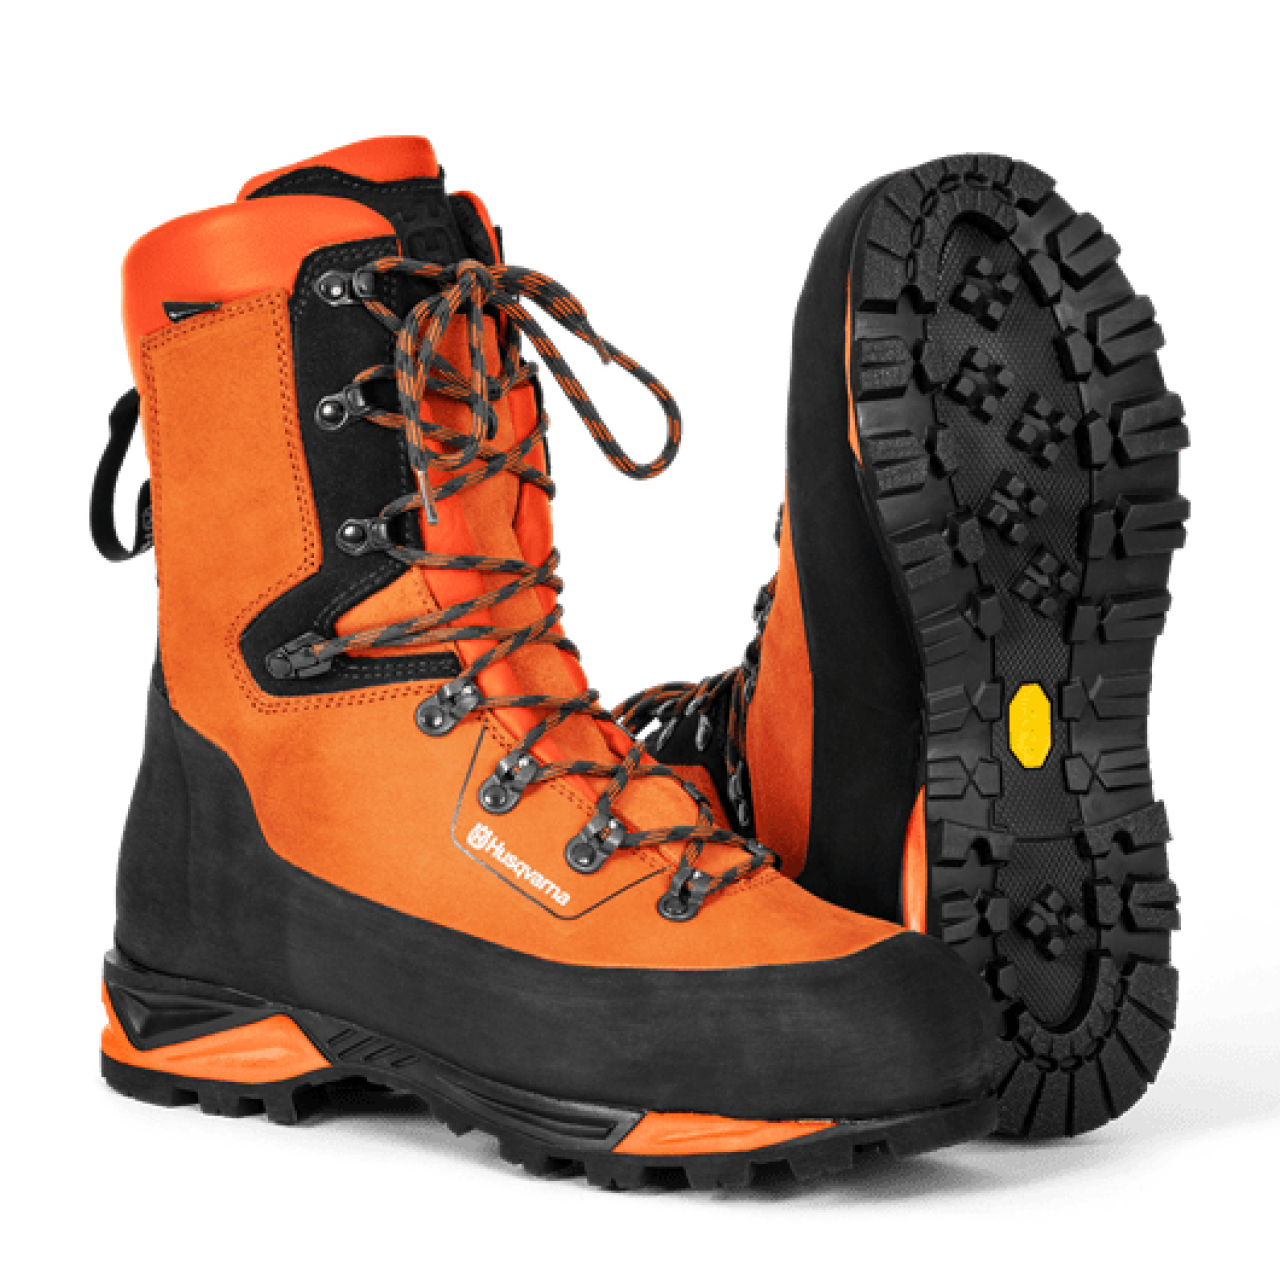 Stiefel Technical 24 Level 2 Gr. 38